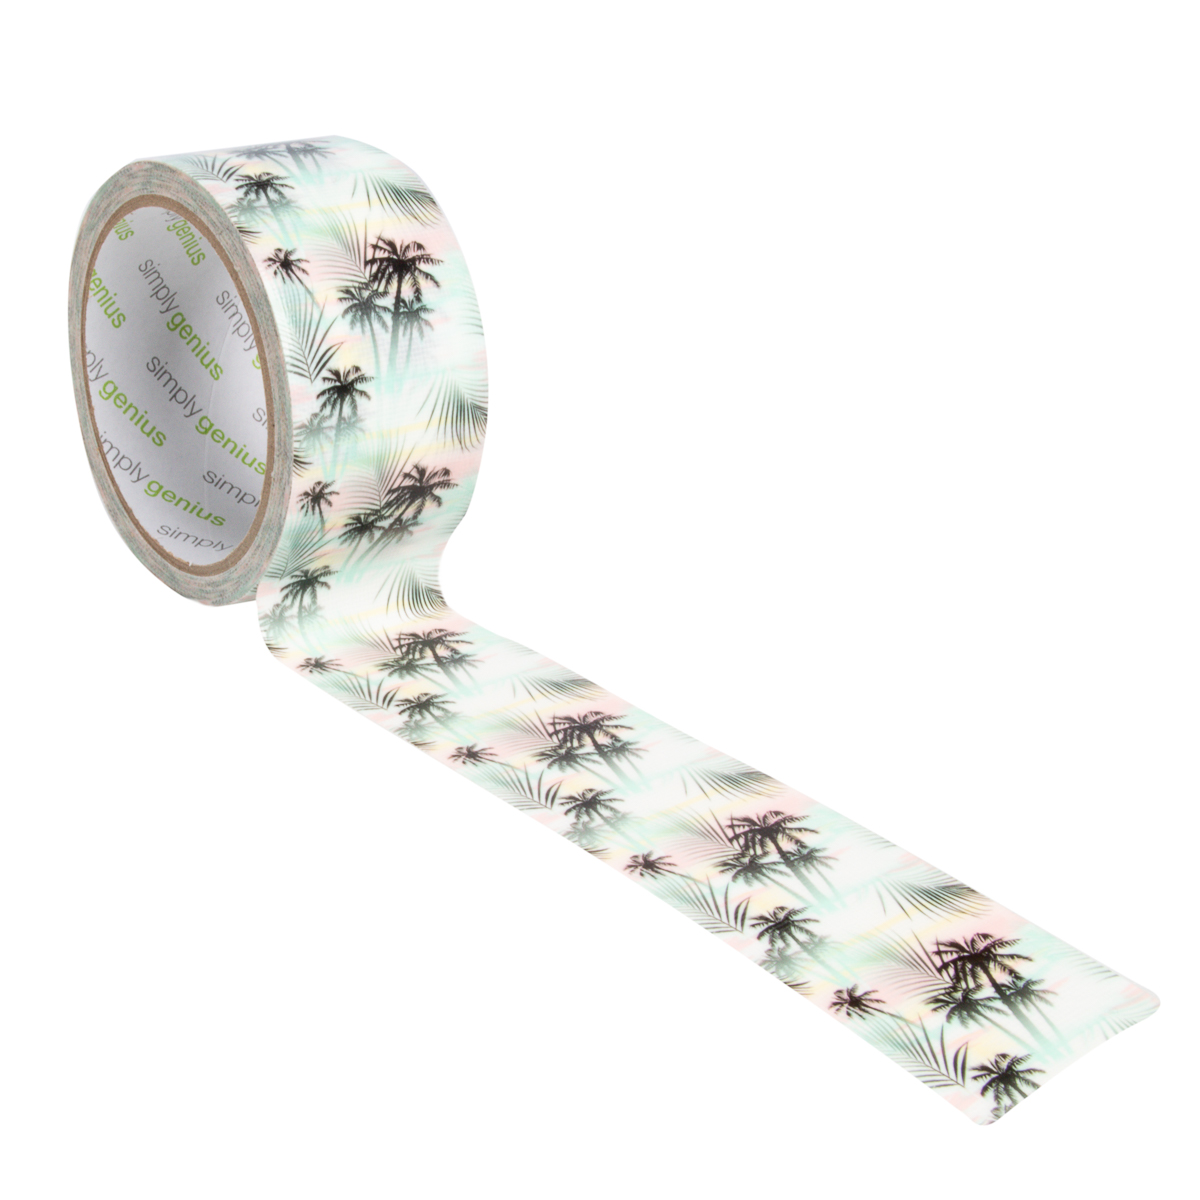 Simply Genius Craft Duct Tape Roll with Colors and Patterns, Tropical Breeze